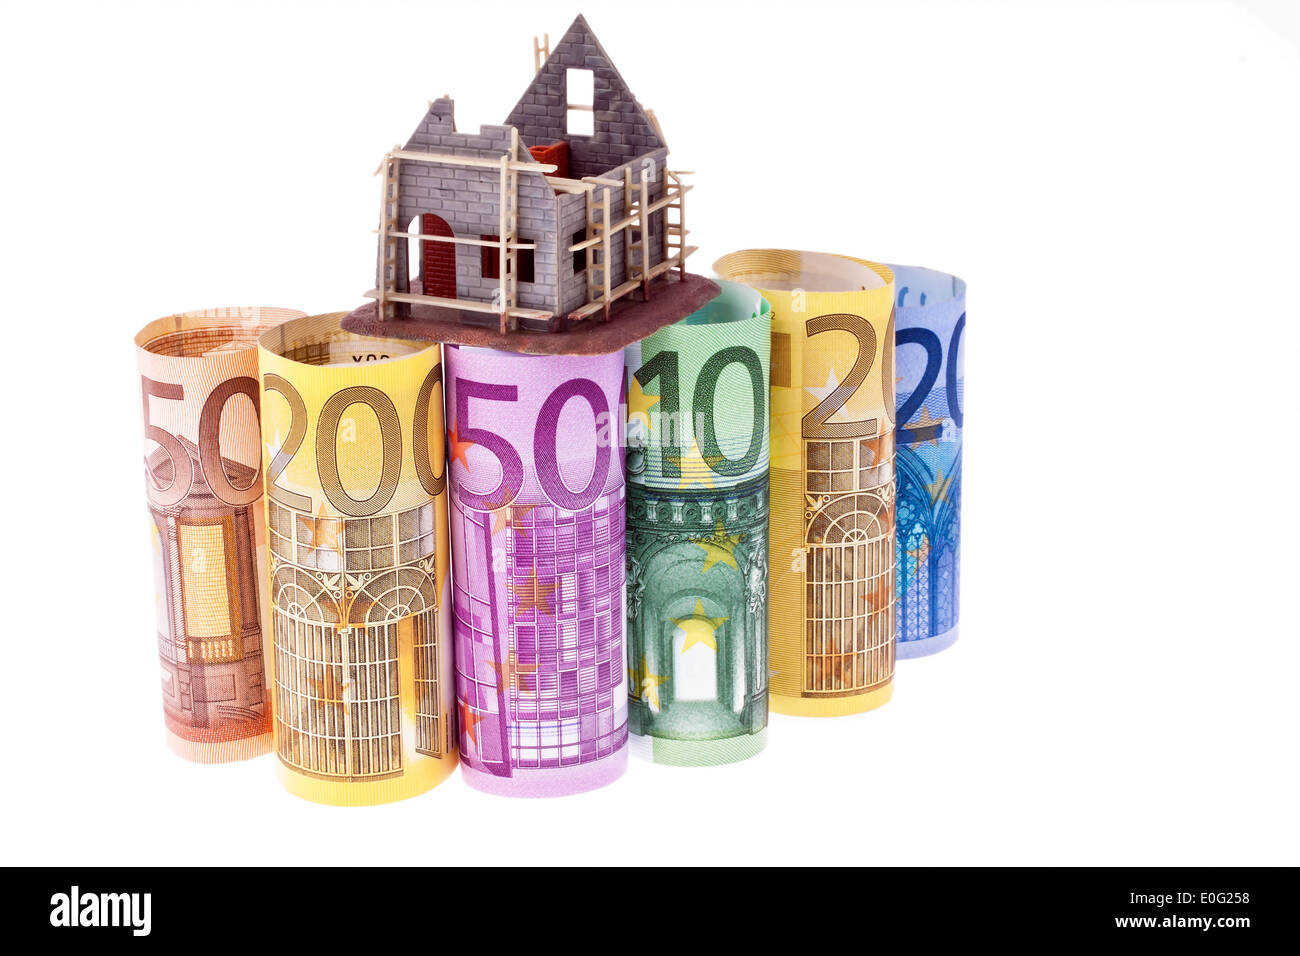 A lot of euro of bank notes with shell house, Viele Euro Geldscheine mit Rohbau Haus Stock Photo